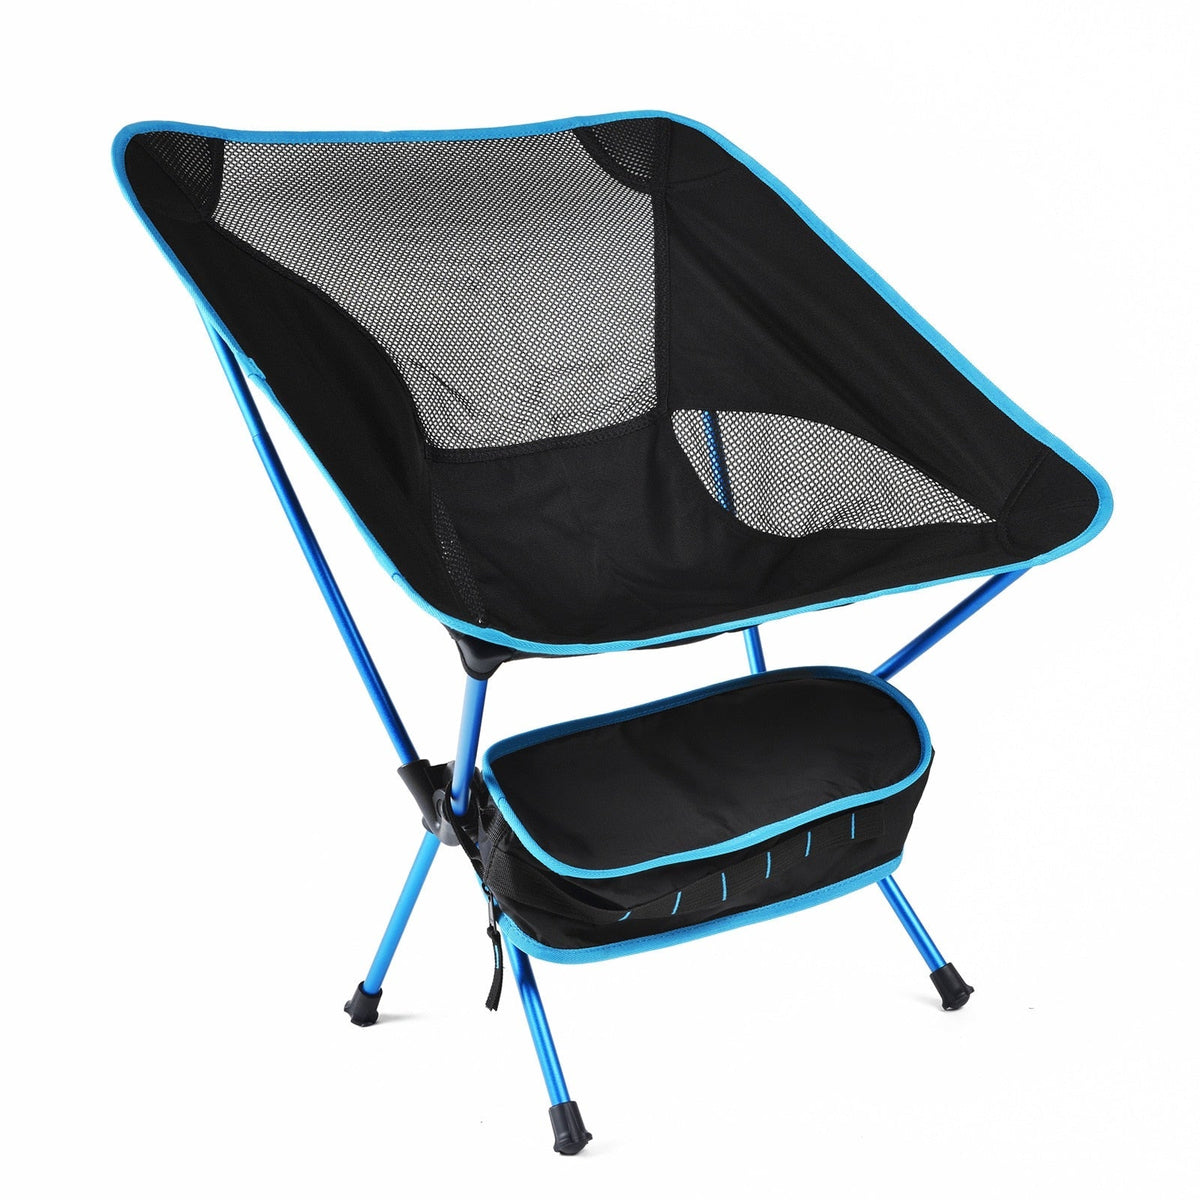 Portable Ultralight Folding Chair 210KG High Load Outdoor Camping Chair Hiking Picnic Fishing Seat High Strength Aluminum Alloy